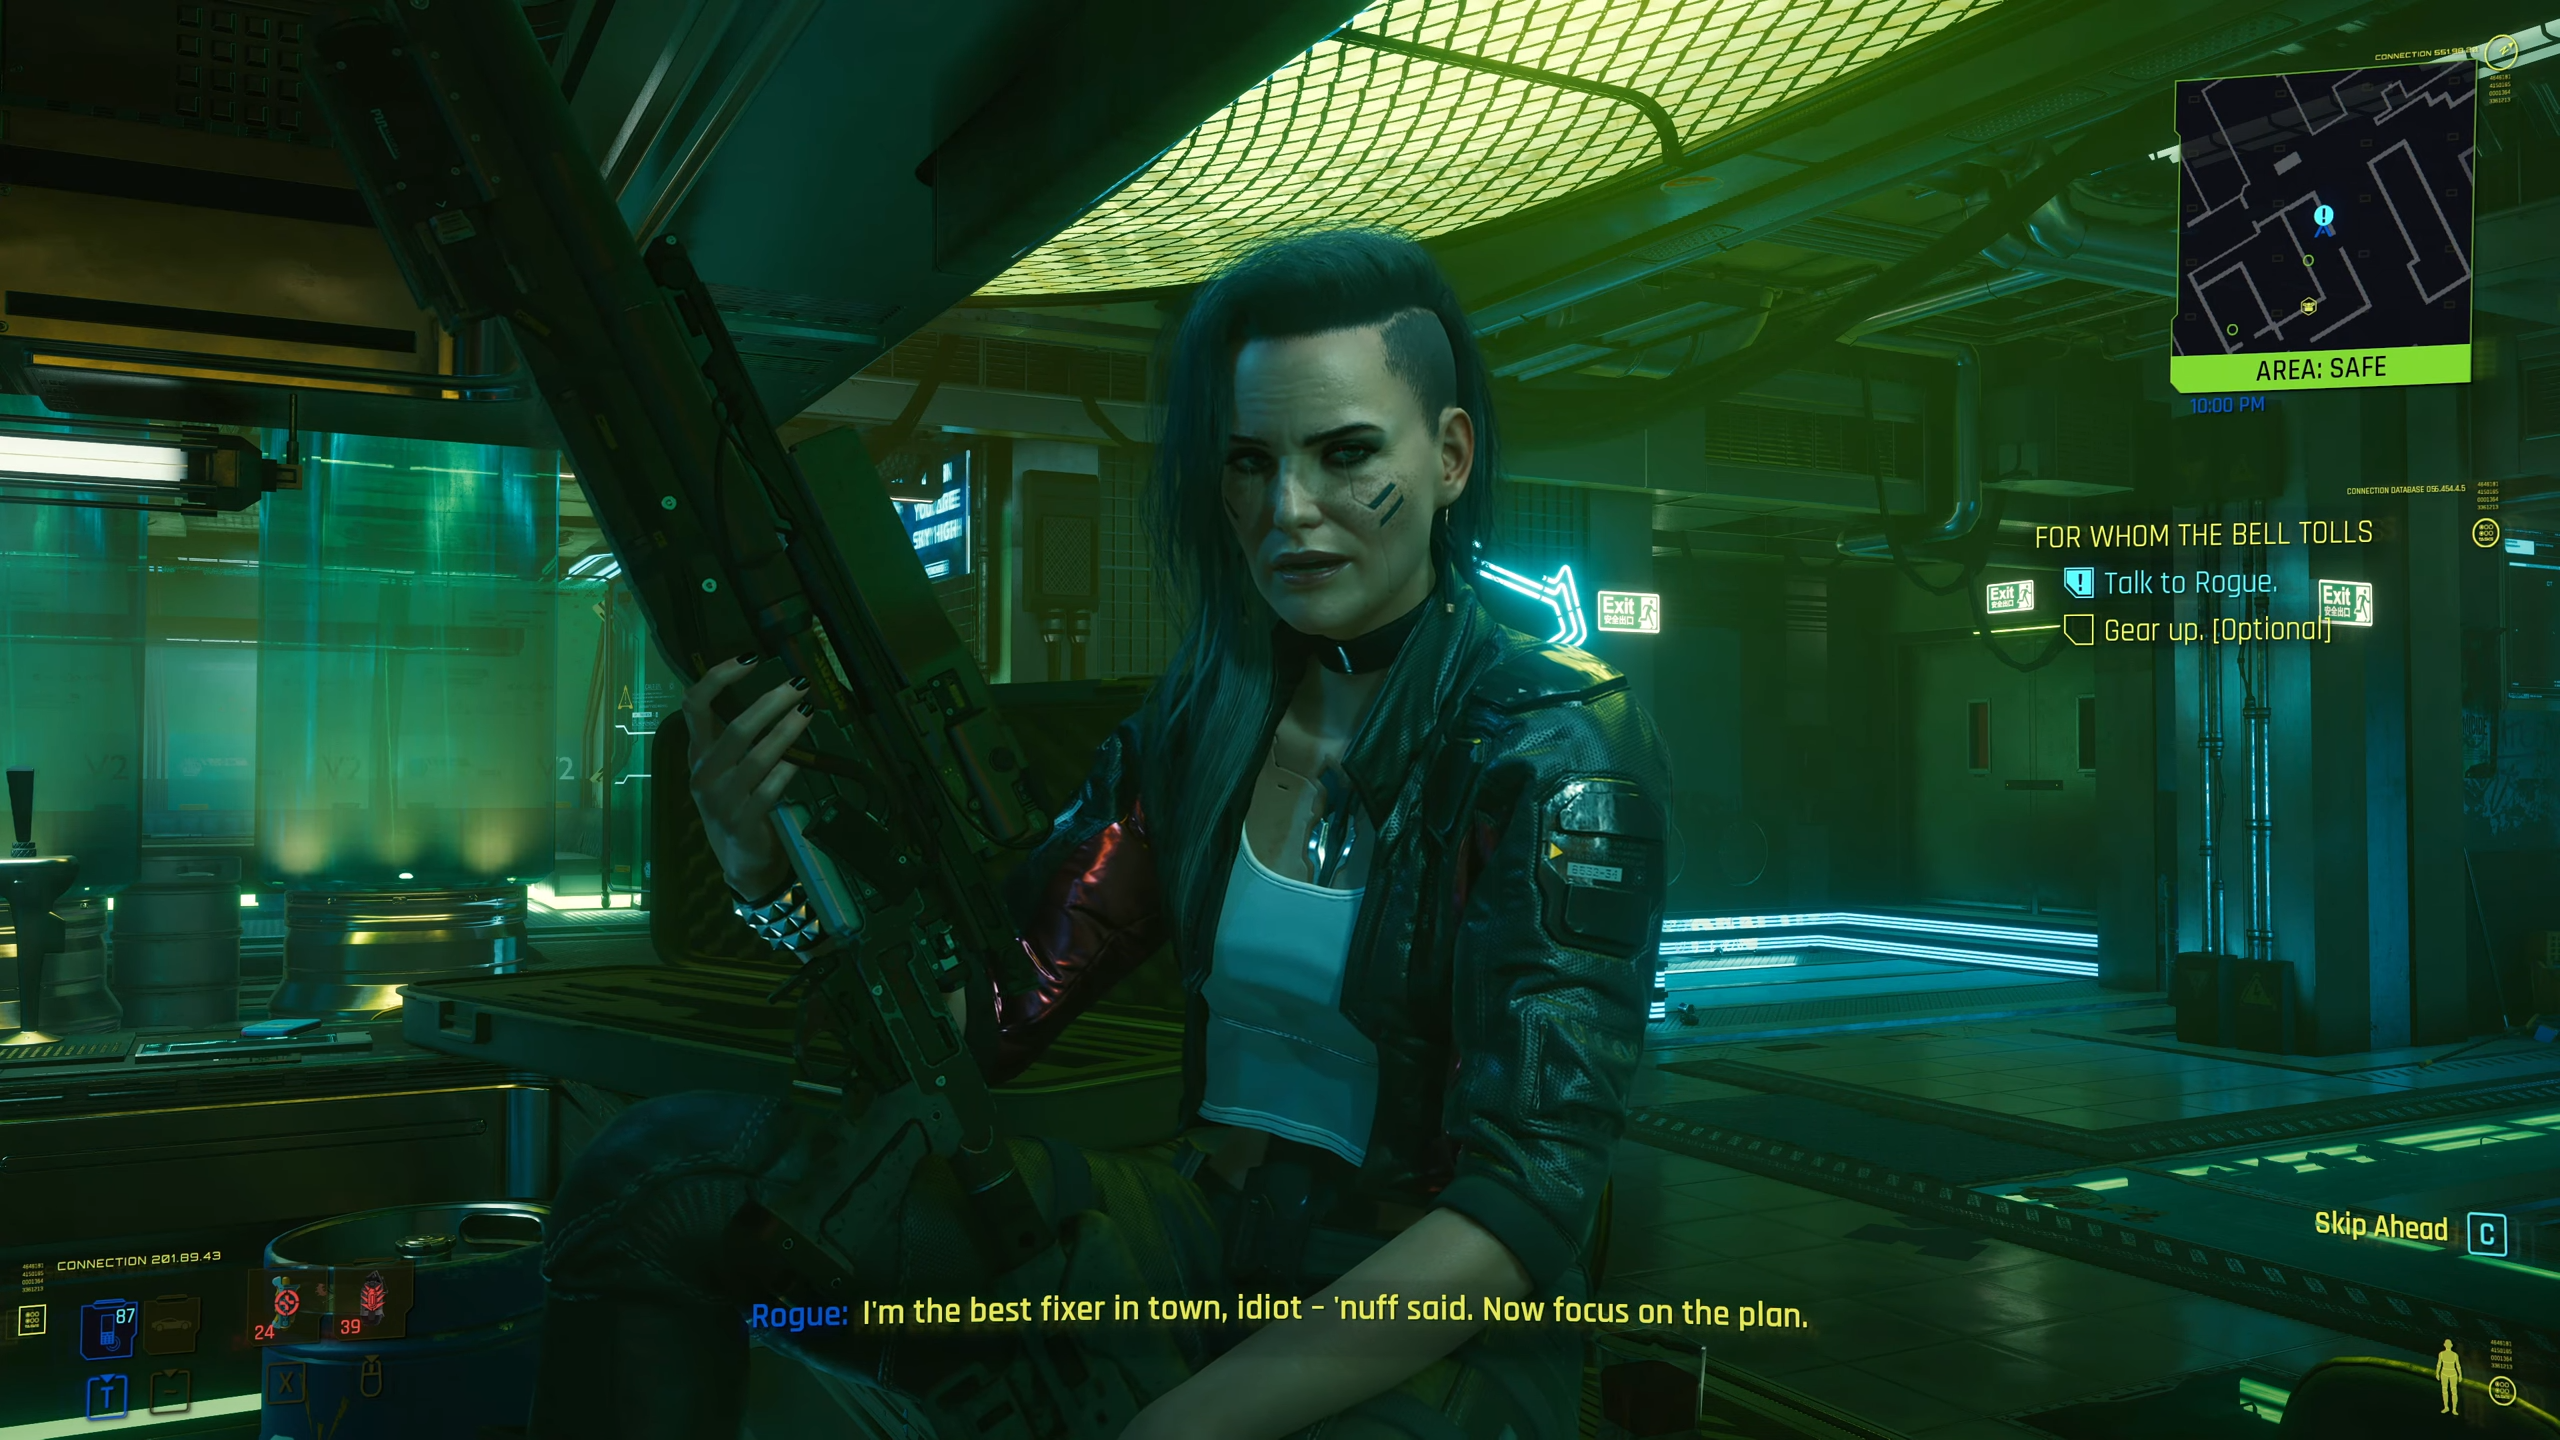 Cyberpunk 2077 Best Ending  How to get all endings and secret